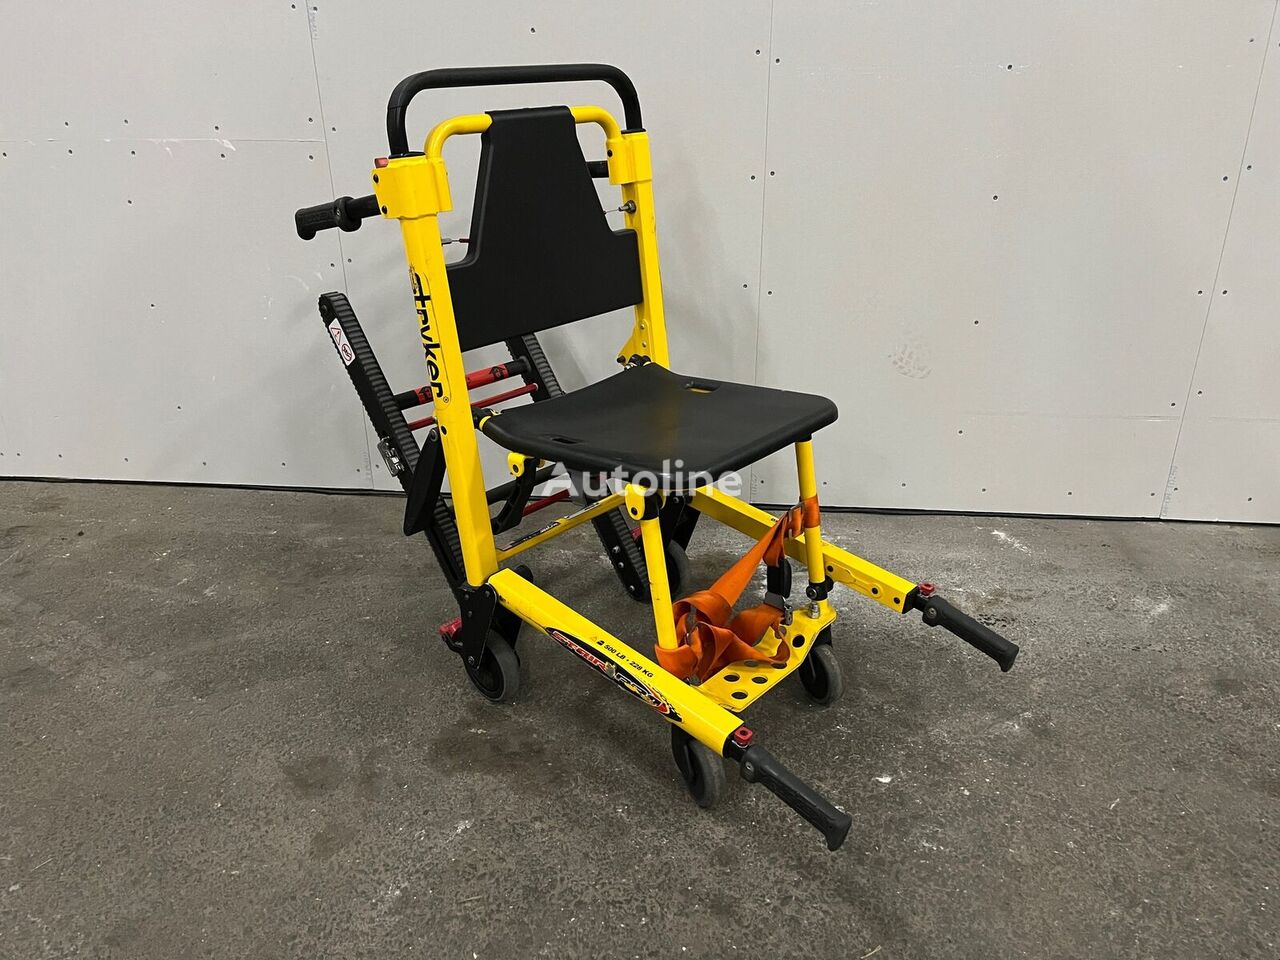 Carry chair - Stryker Prostair 6252 ambulancia